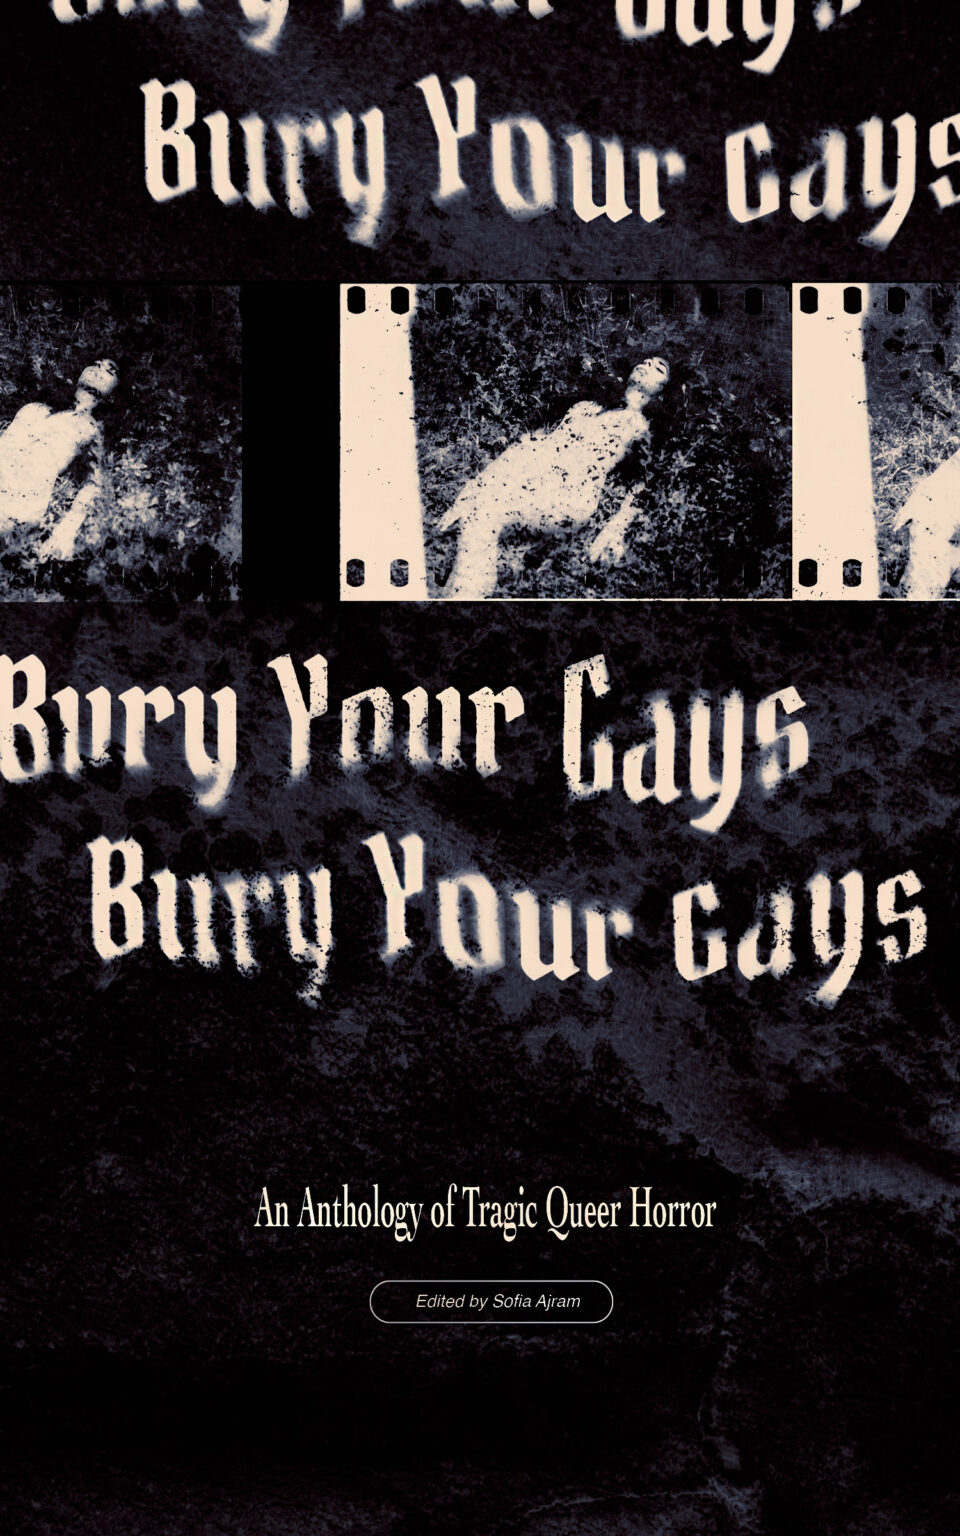 Bury Your Gays paperback cover